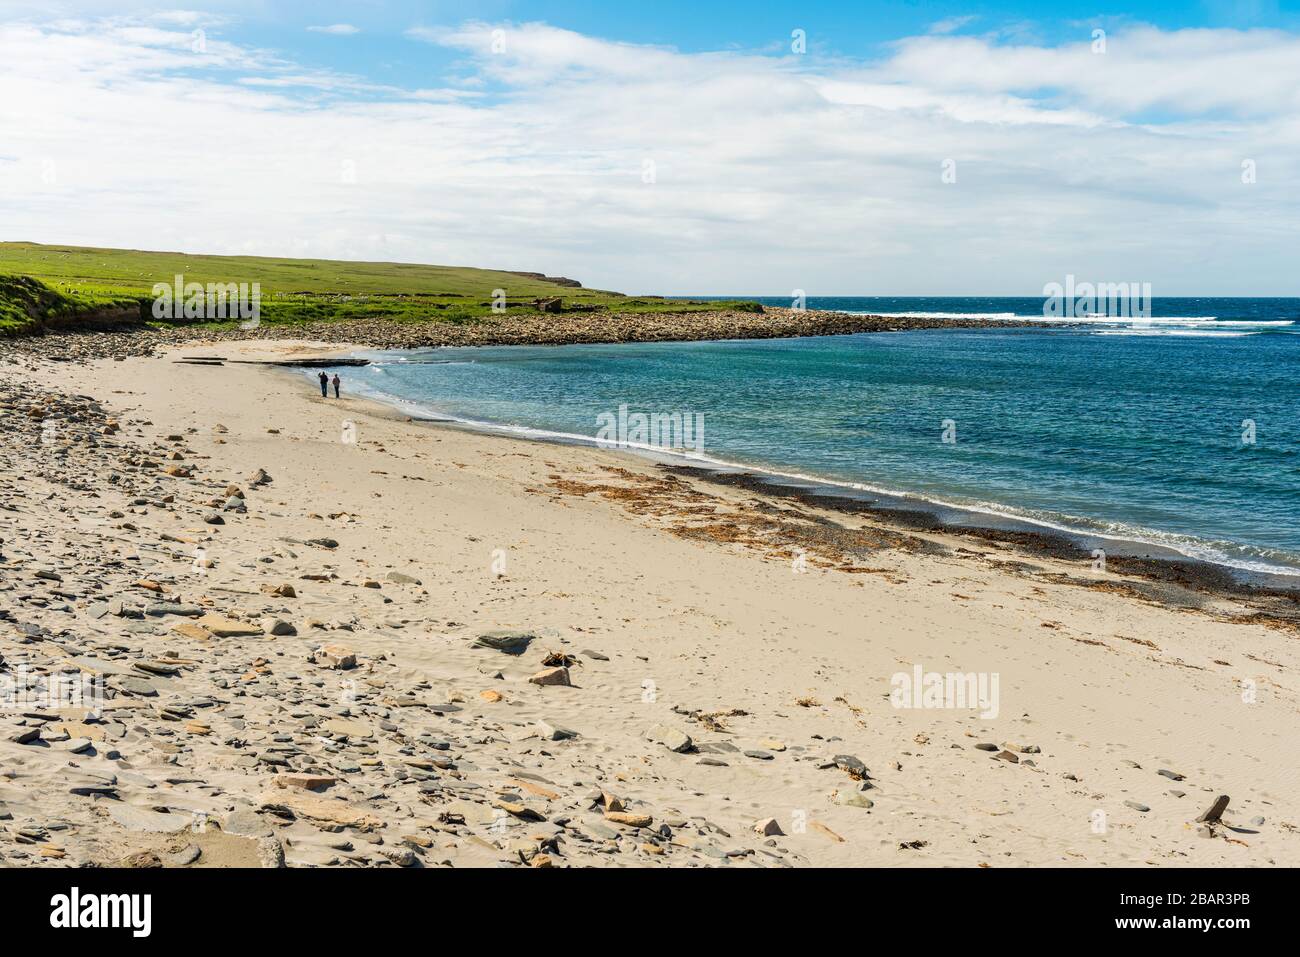 The beach at the Bay of Skaill, site of Skara Brae Neolithic settlement, Orkney, Scotland, UK. Stock Photo